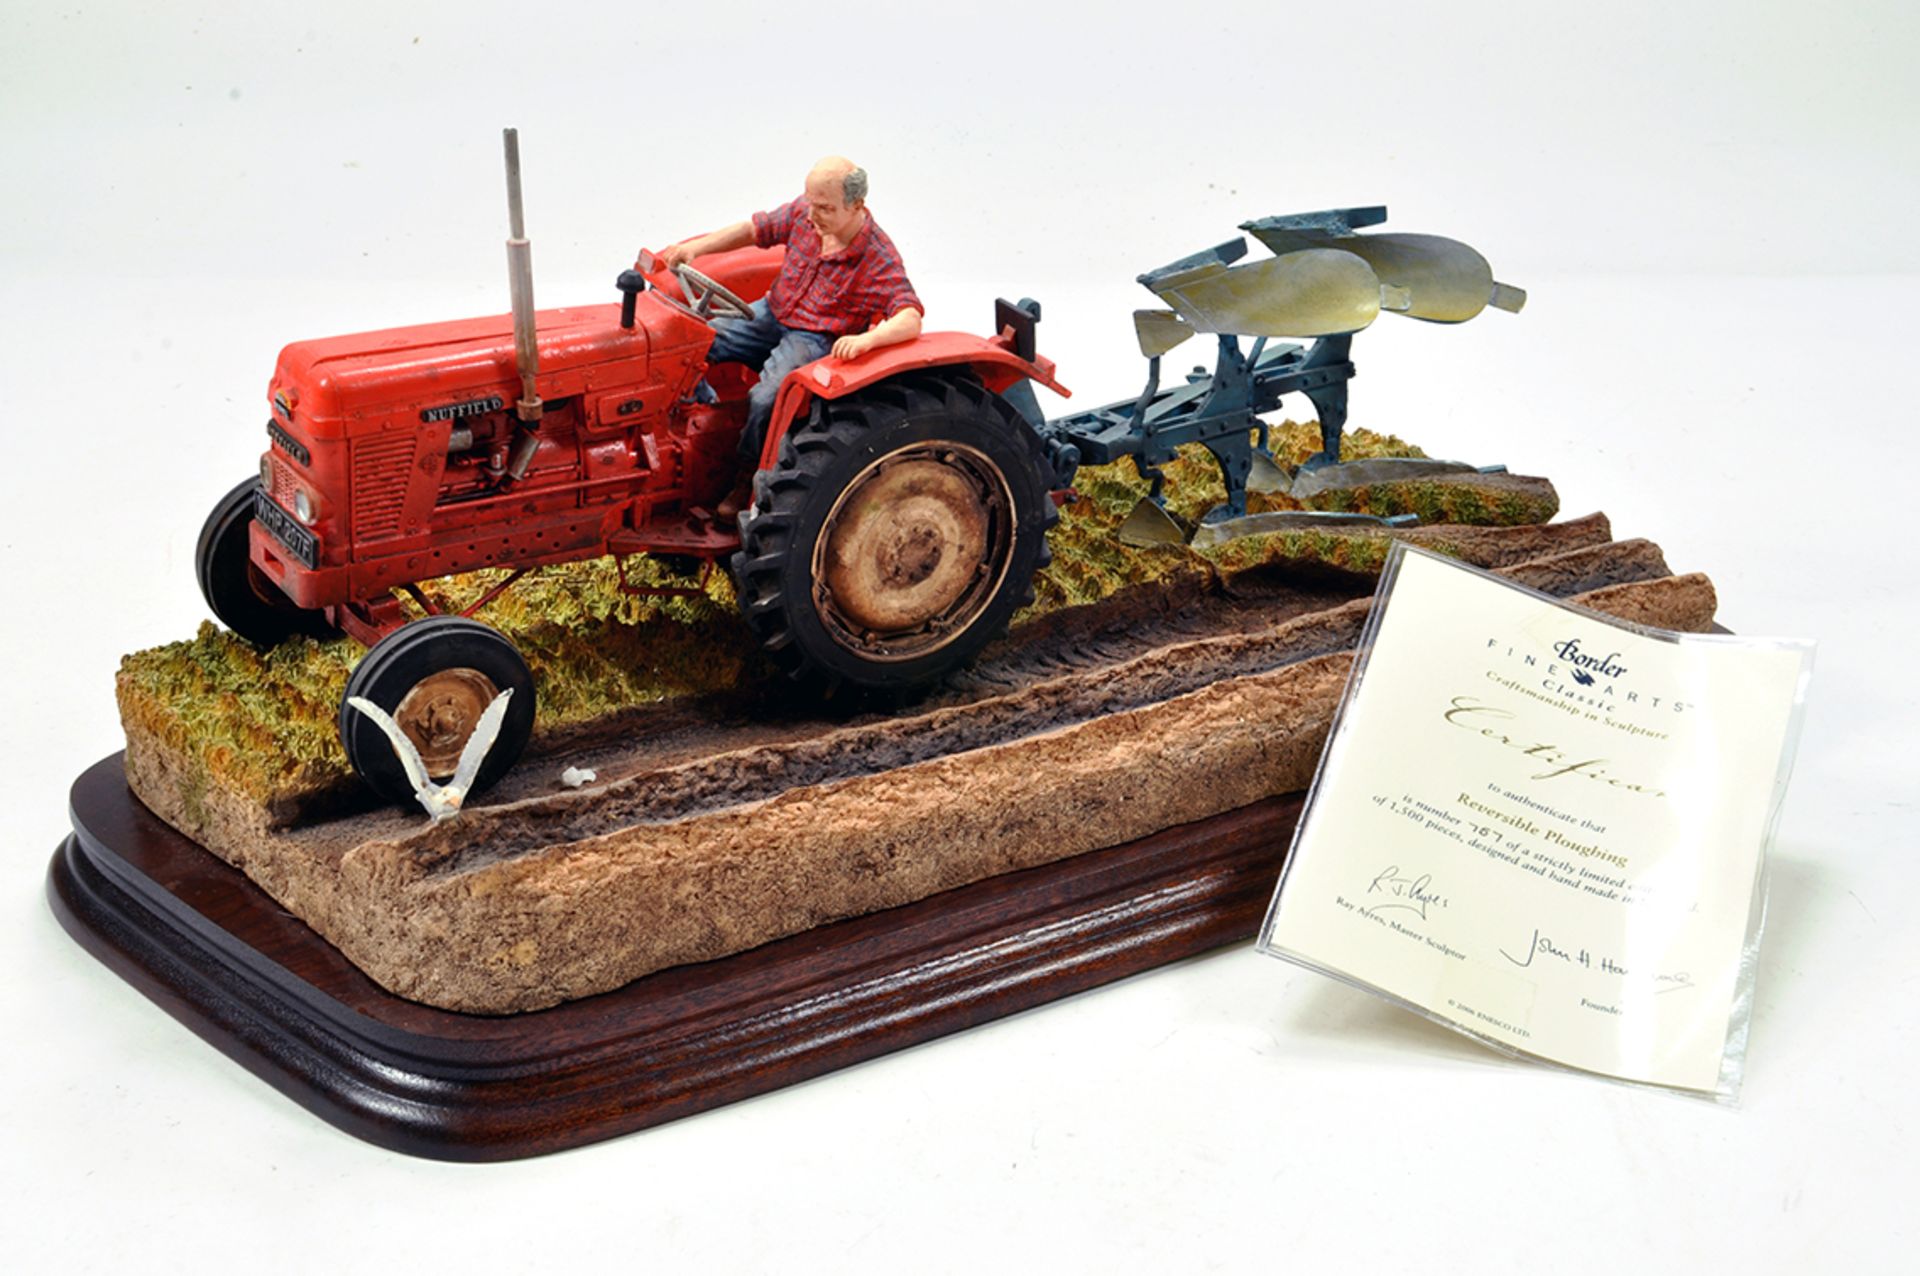 Border Fine Arts Limited Edition Figurine comprising Reversible Ploughing - Nuffield Tractor. Lovely